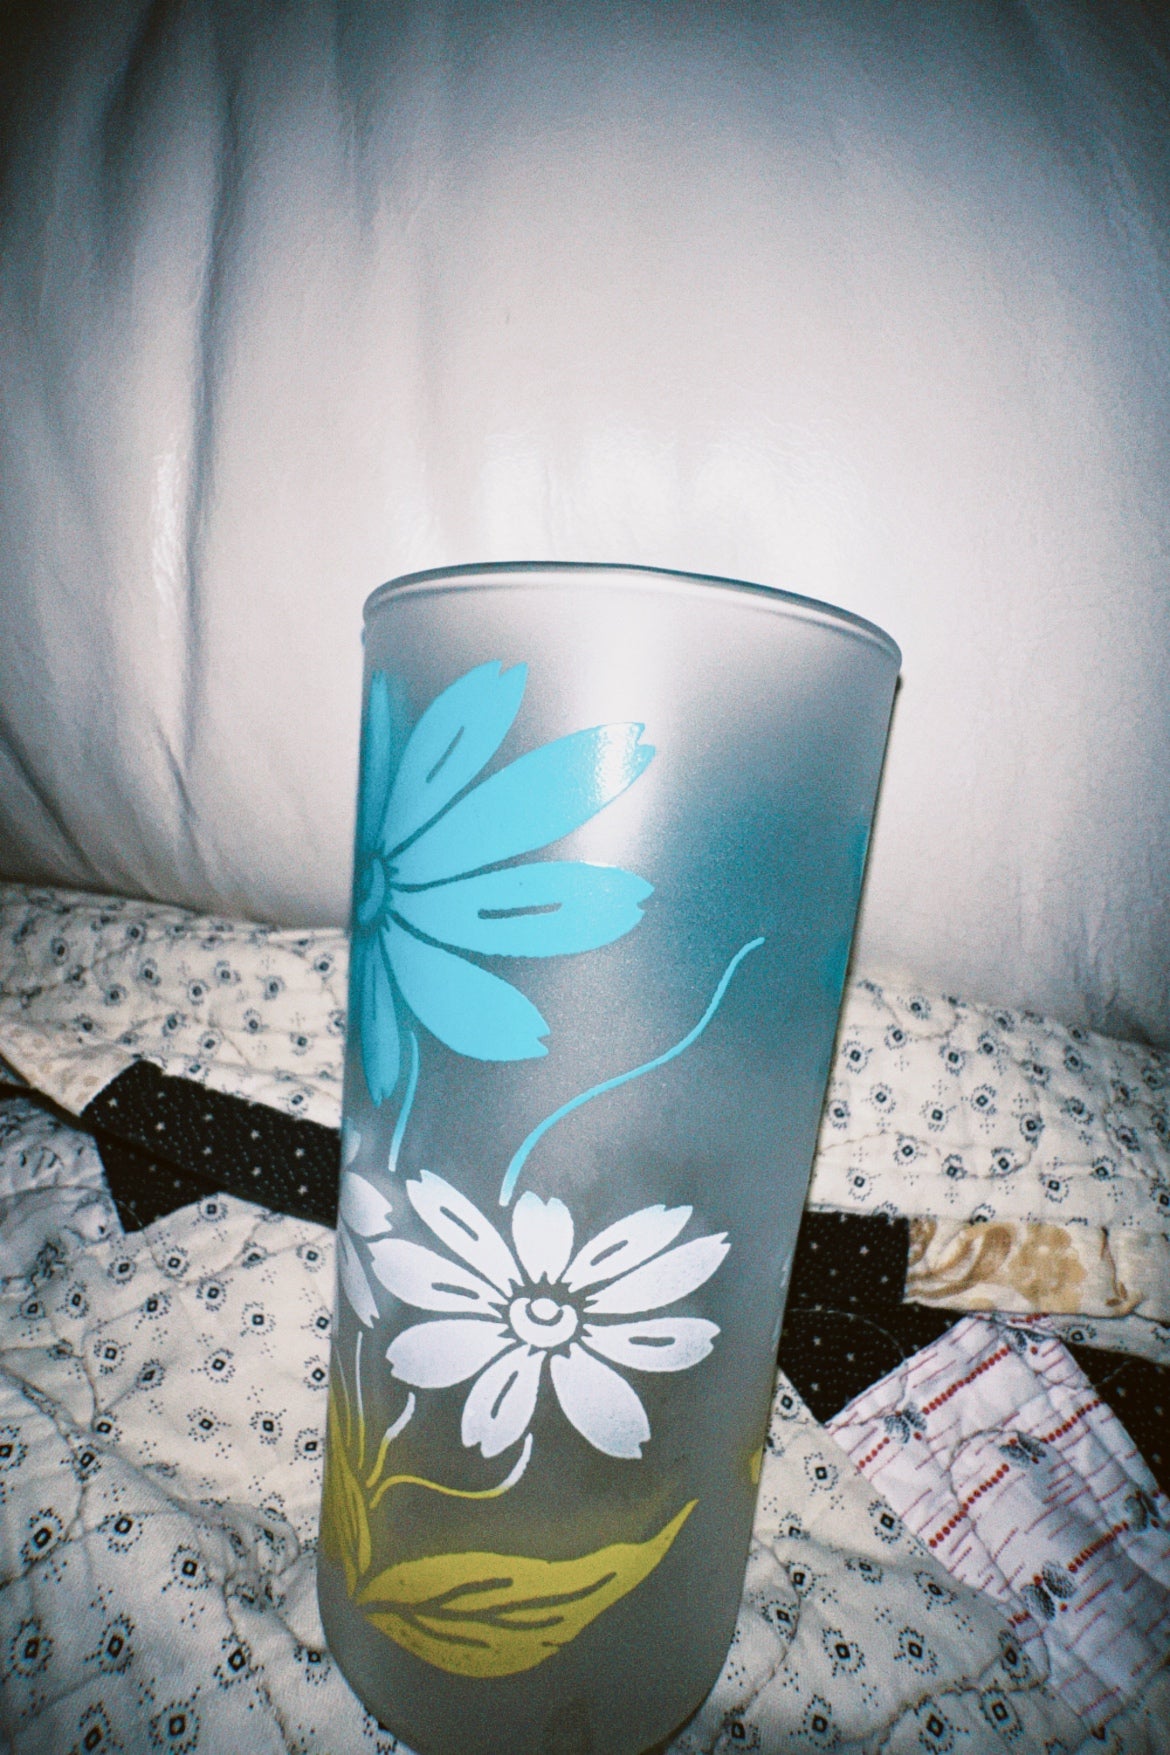 Vintage frosted glass with flower printing